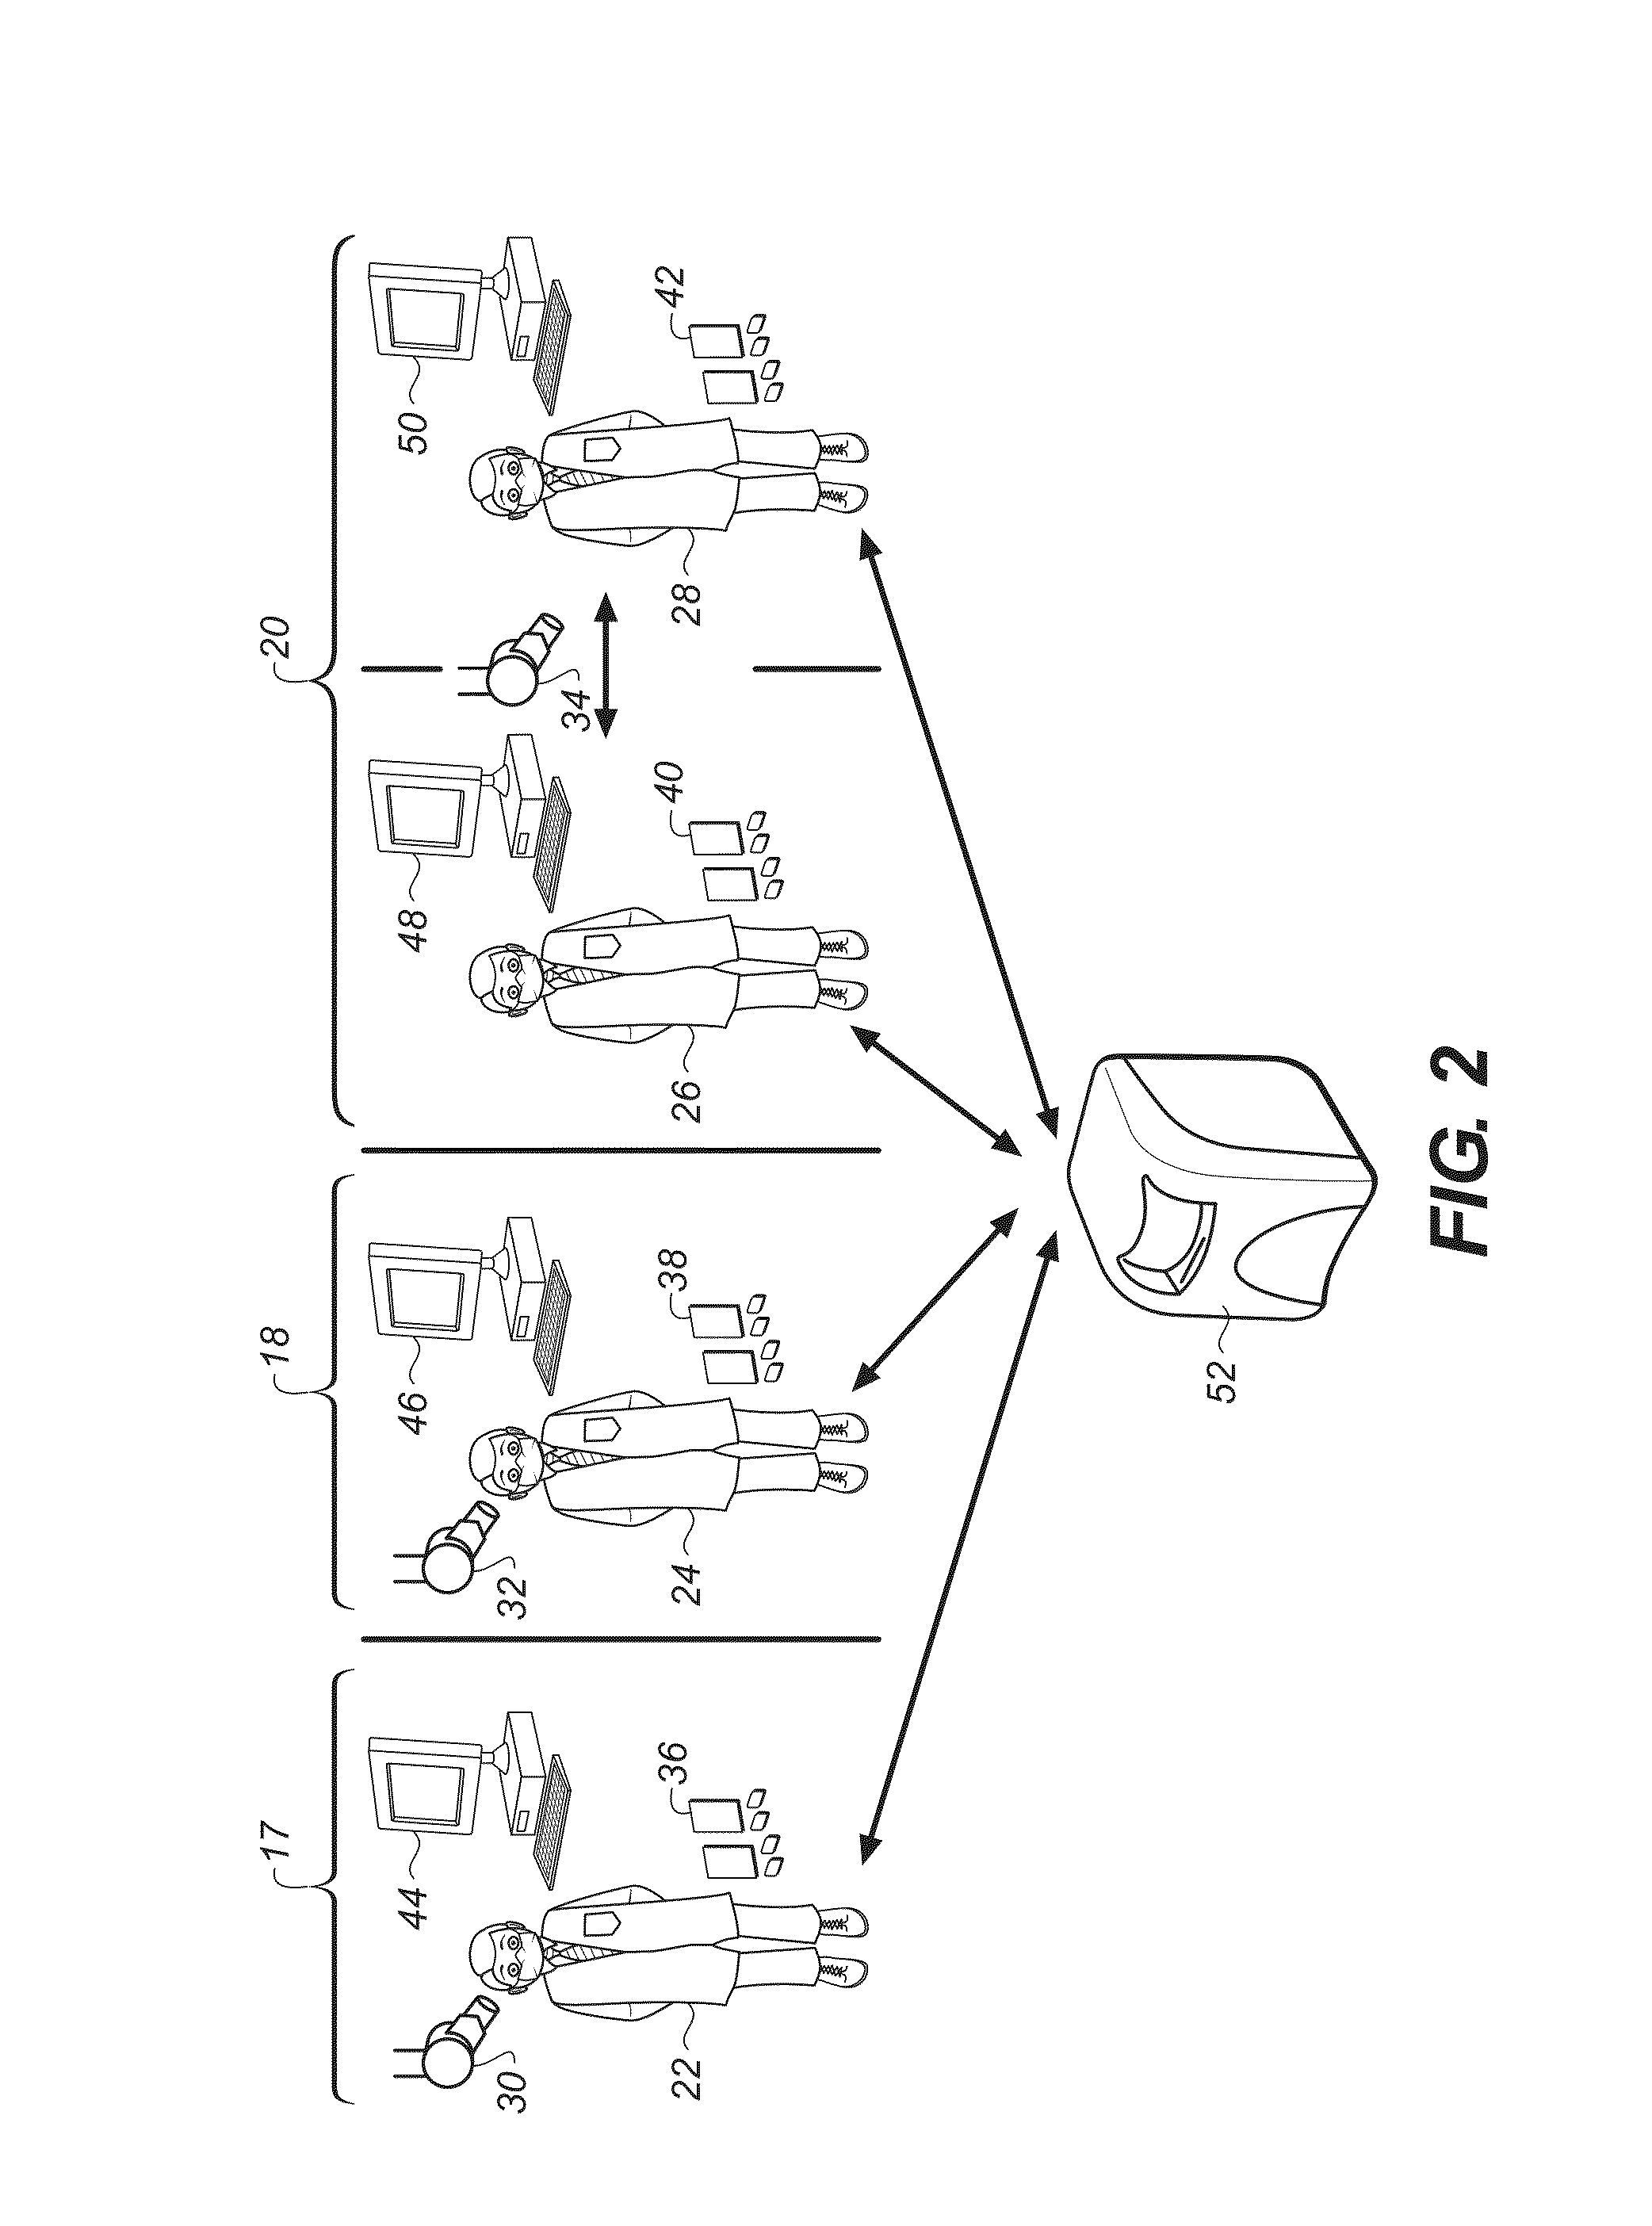 Method and system for computed radiography using a radio frequency identification device